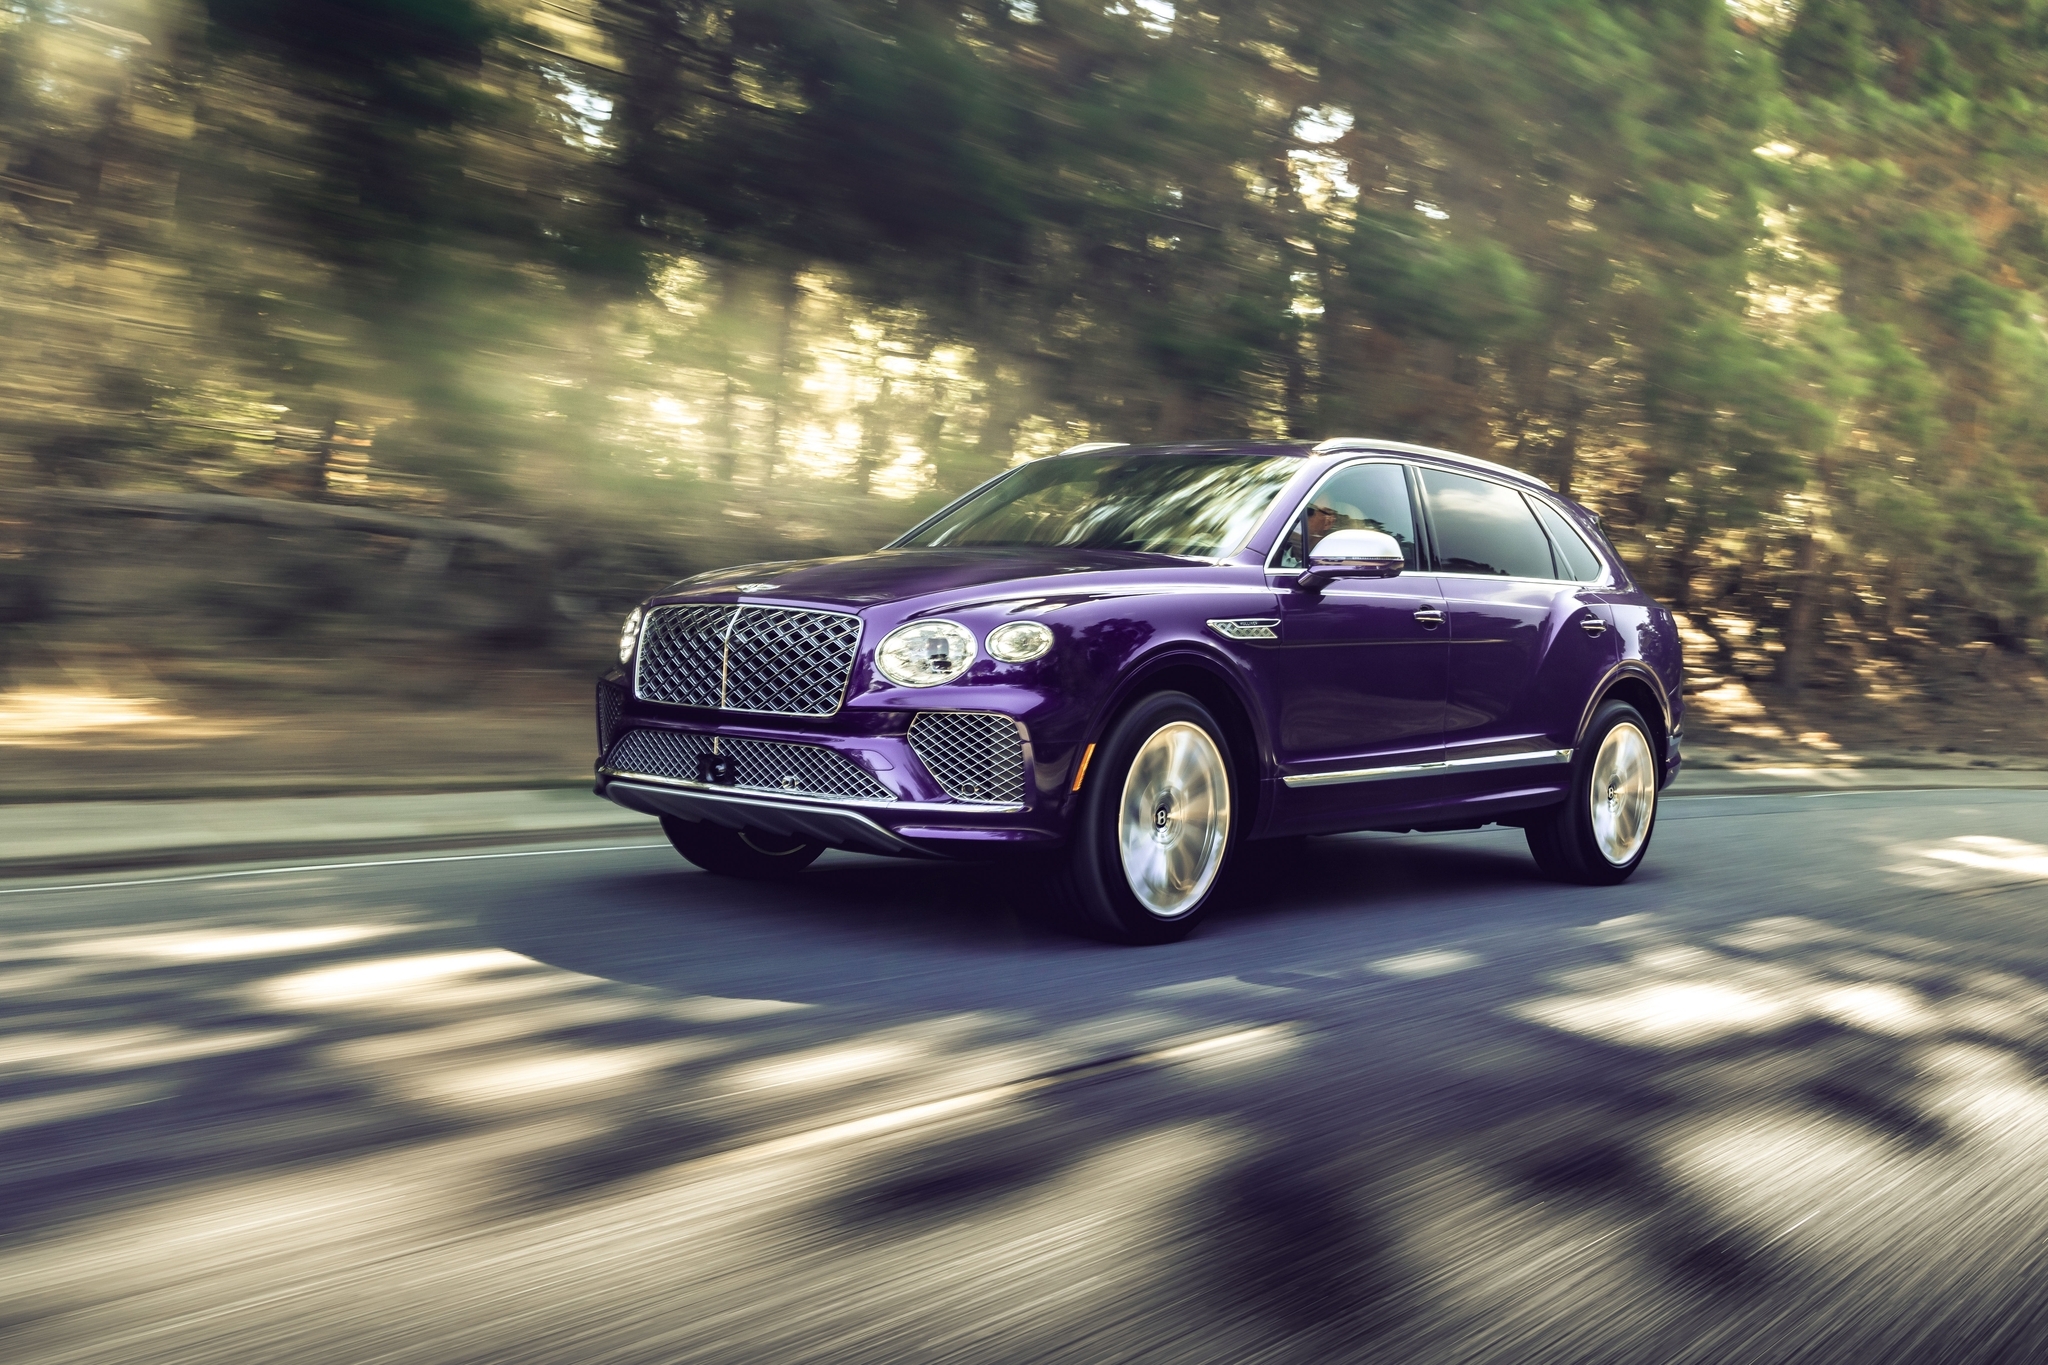 Bentley has released the Bentayga crossover in a luxury version of the Mulliner